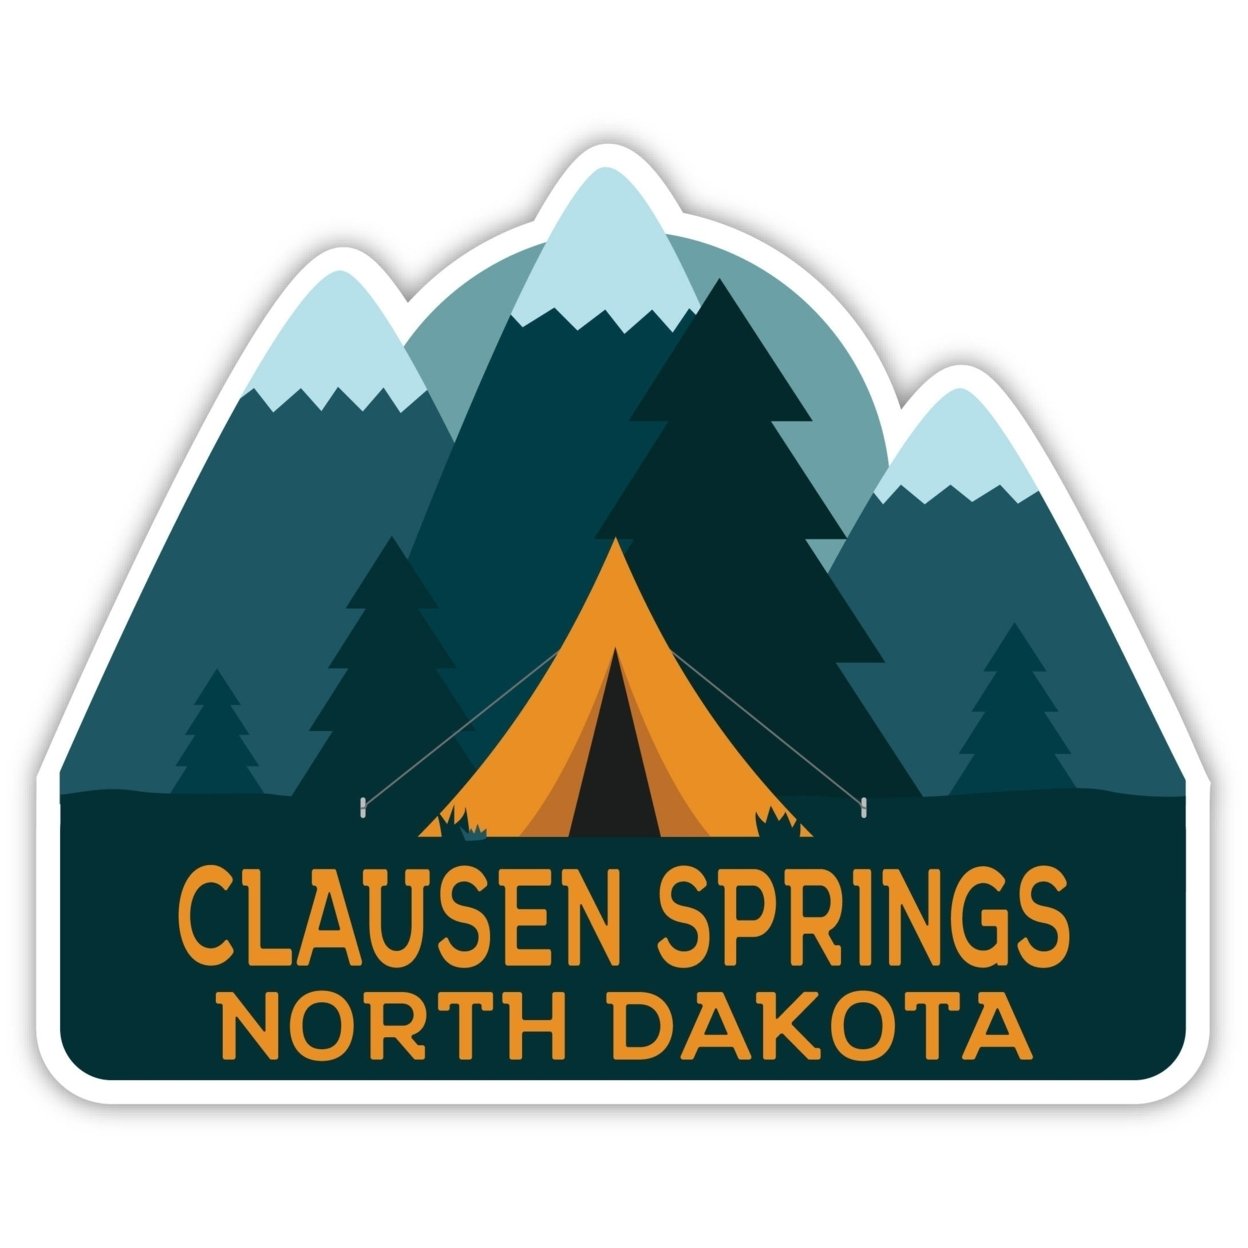 Clausen Springs North Dakota Souvenir Decorative Stickers (Choose Theme And Size) - 4-Pack, 2-Inch, Tent